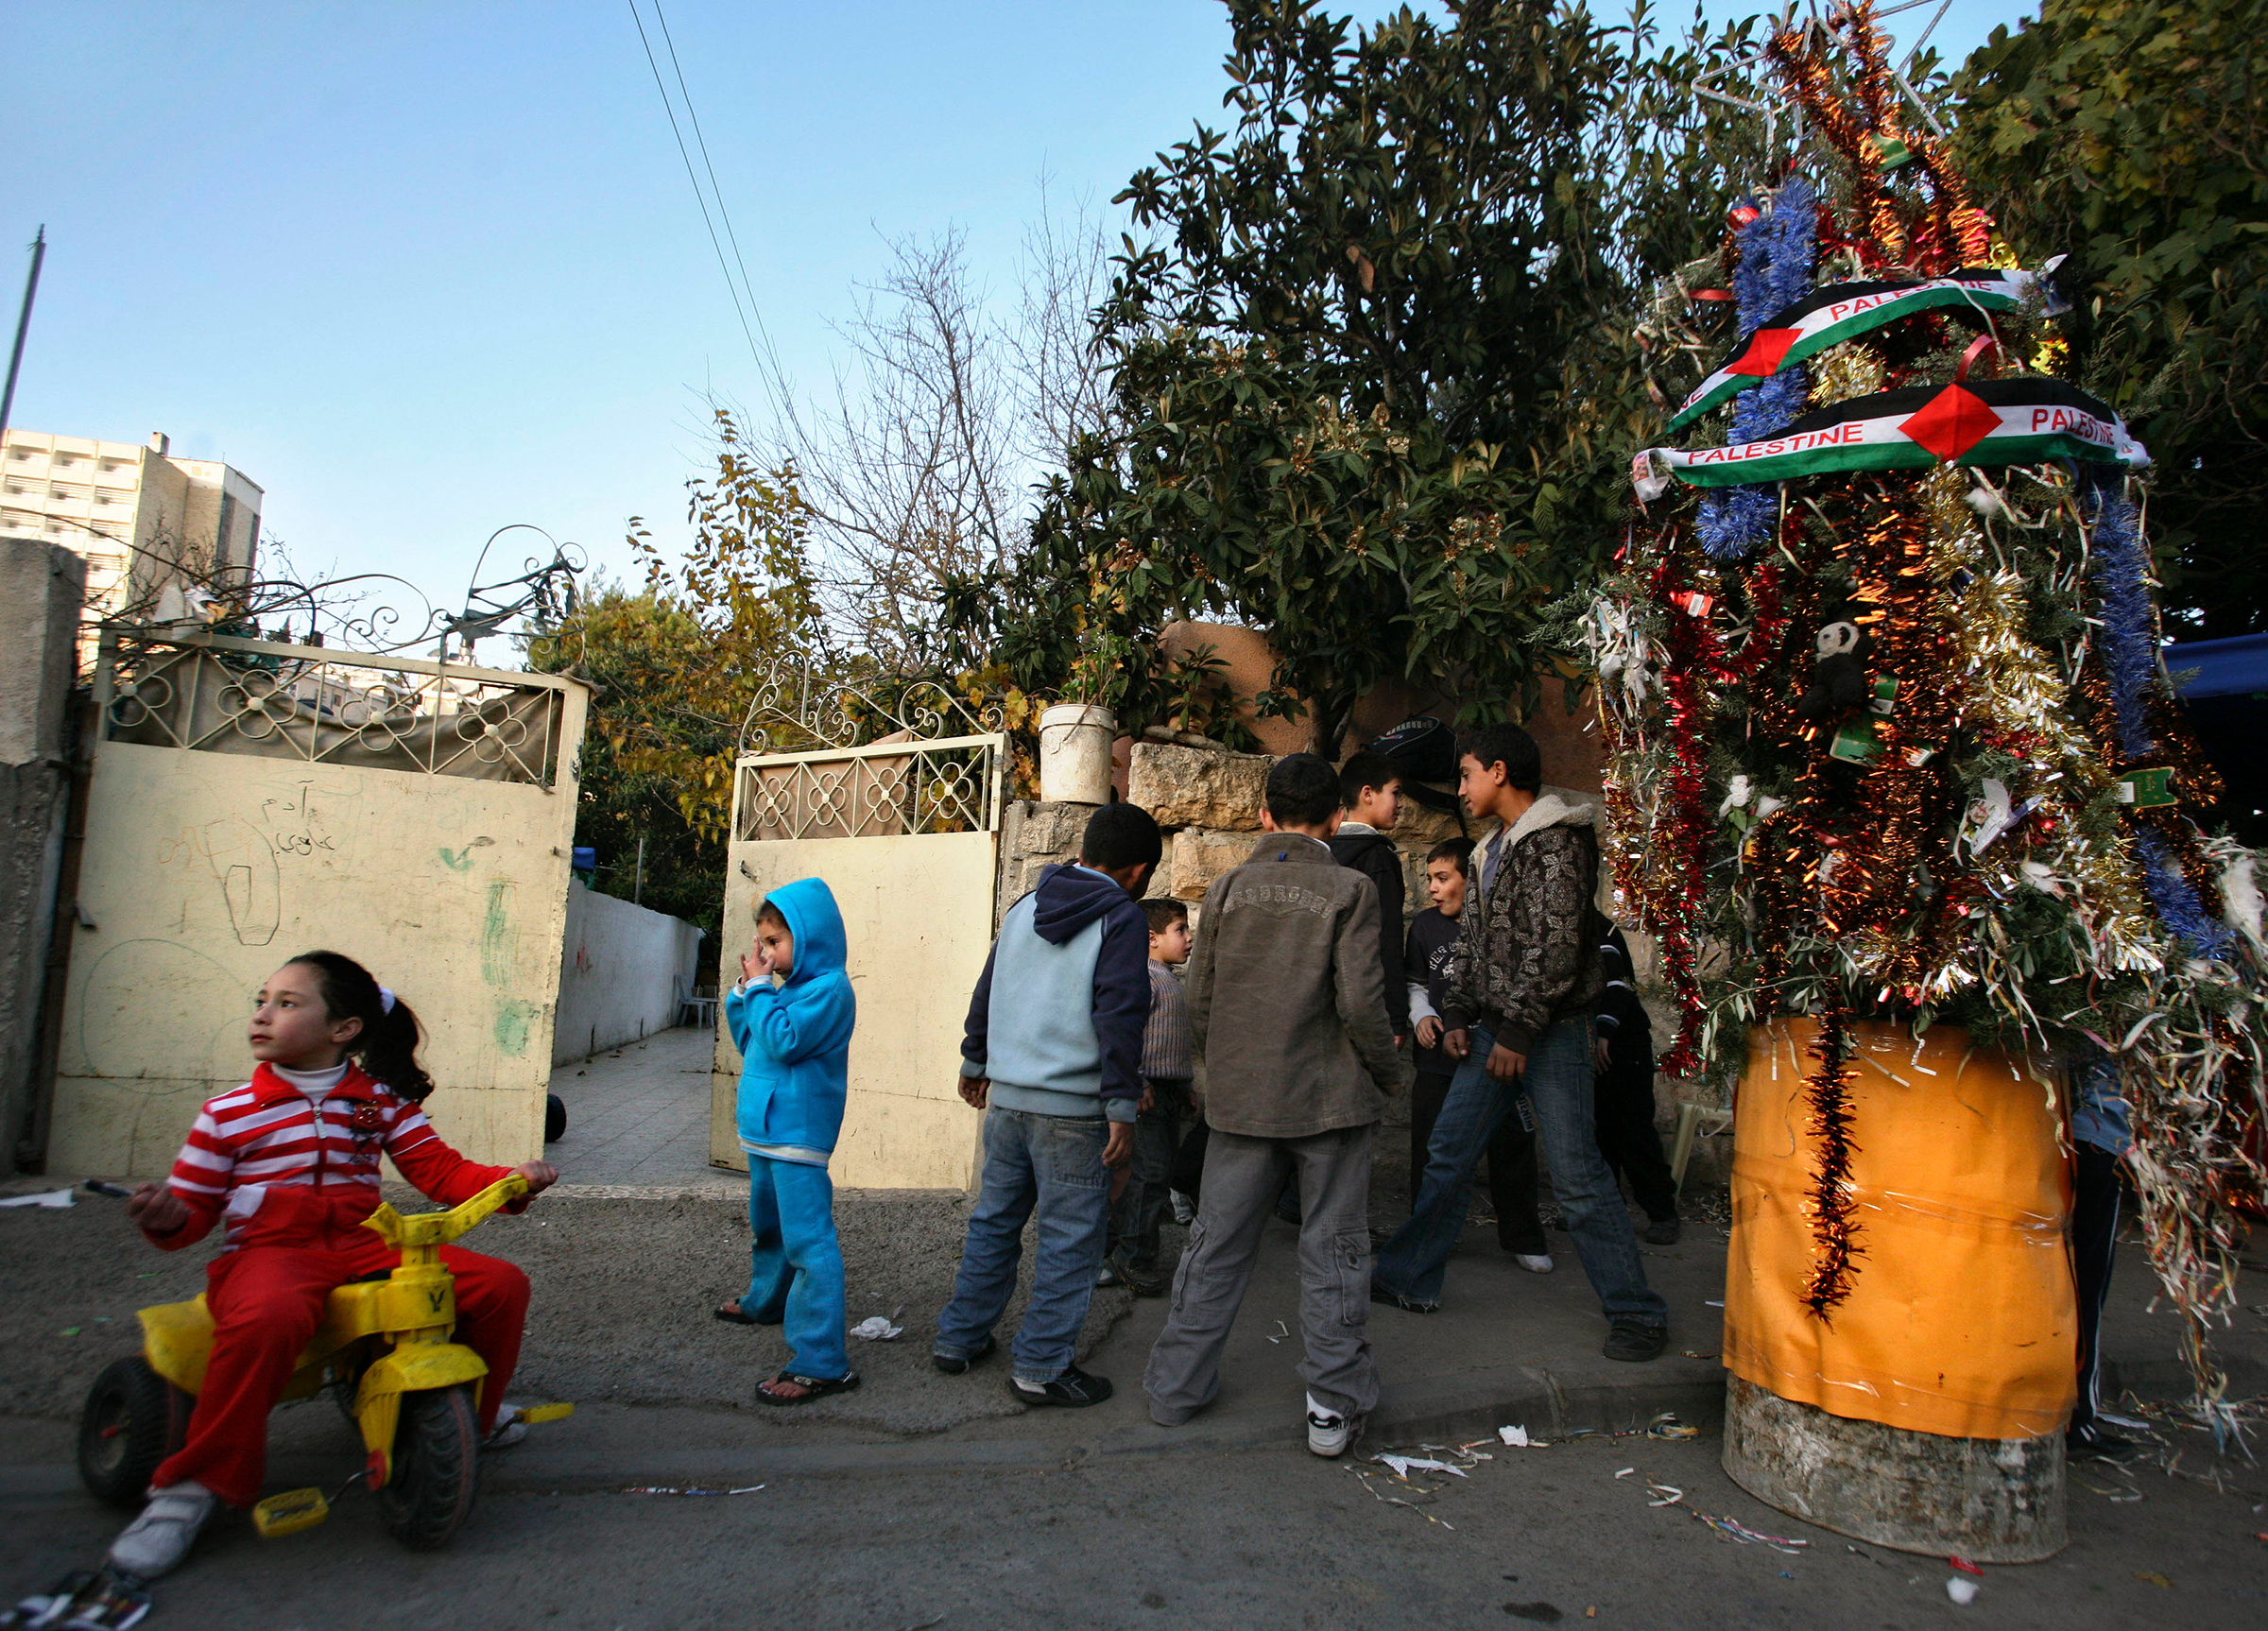 Palestinians gather around a Christmas Tree during a ceremony in the East Jerusalem neighborhood of Sheikh Jarrah on Dec. 23, 2009.